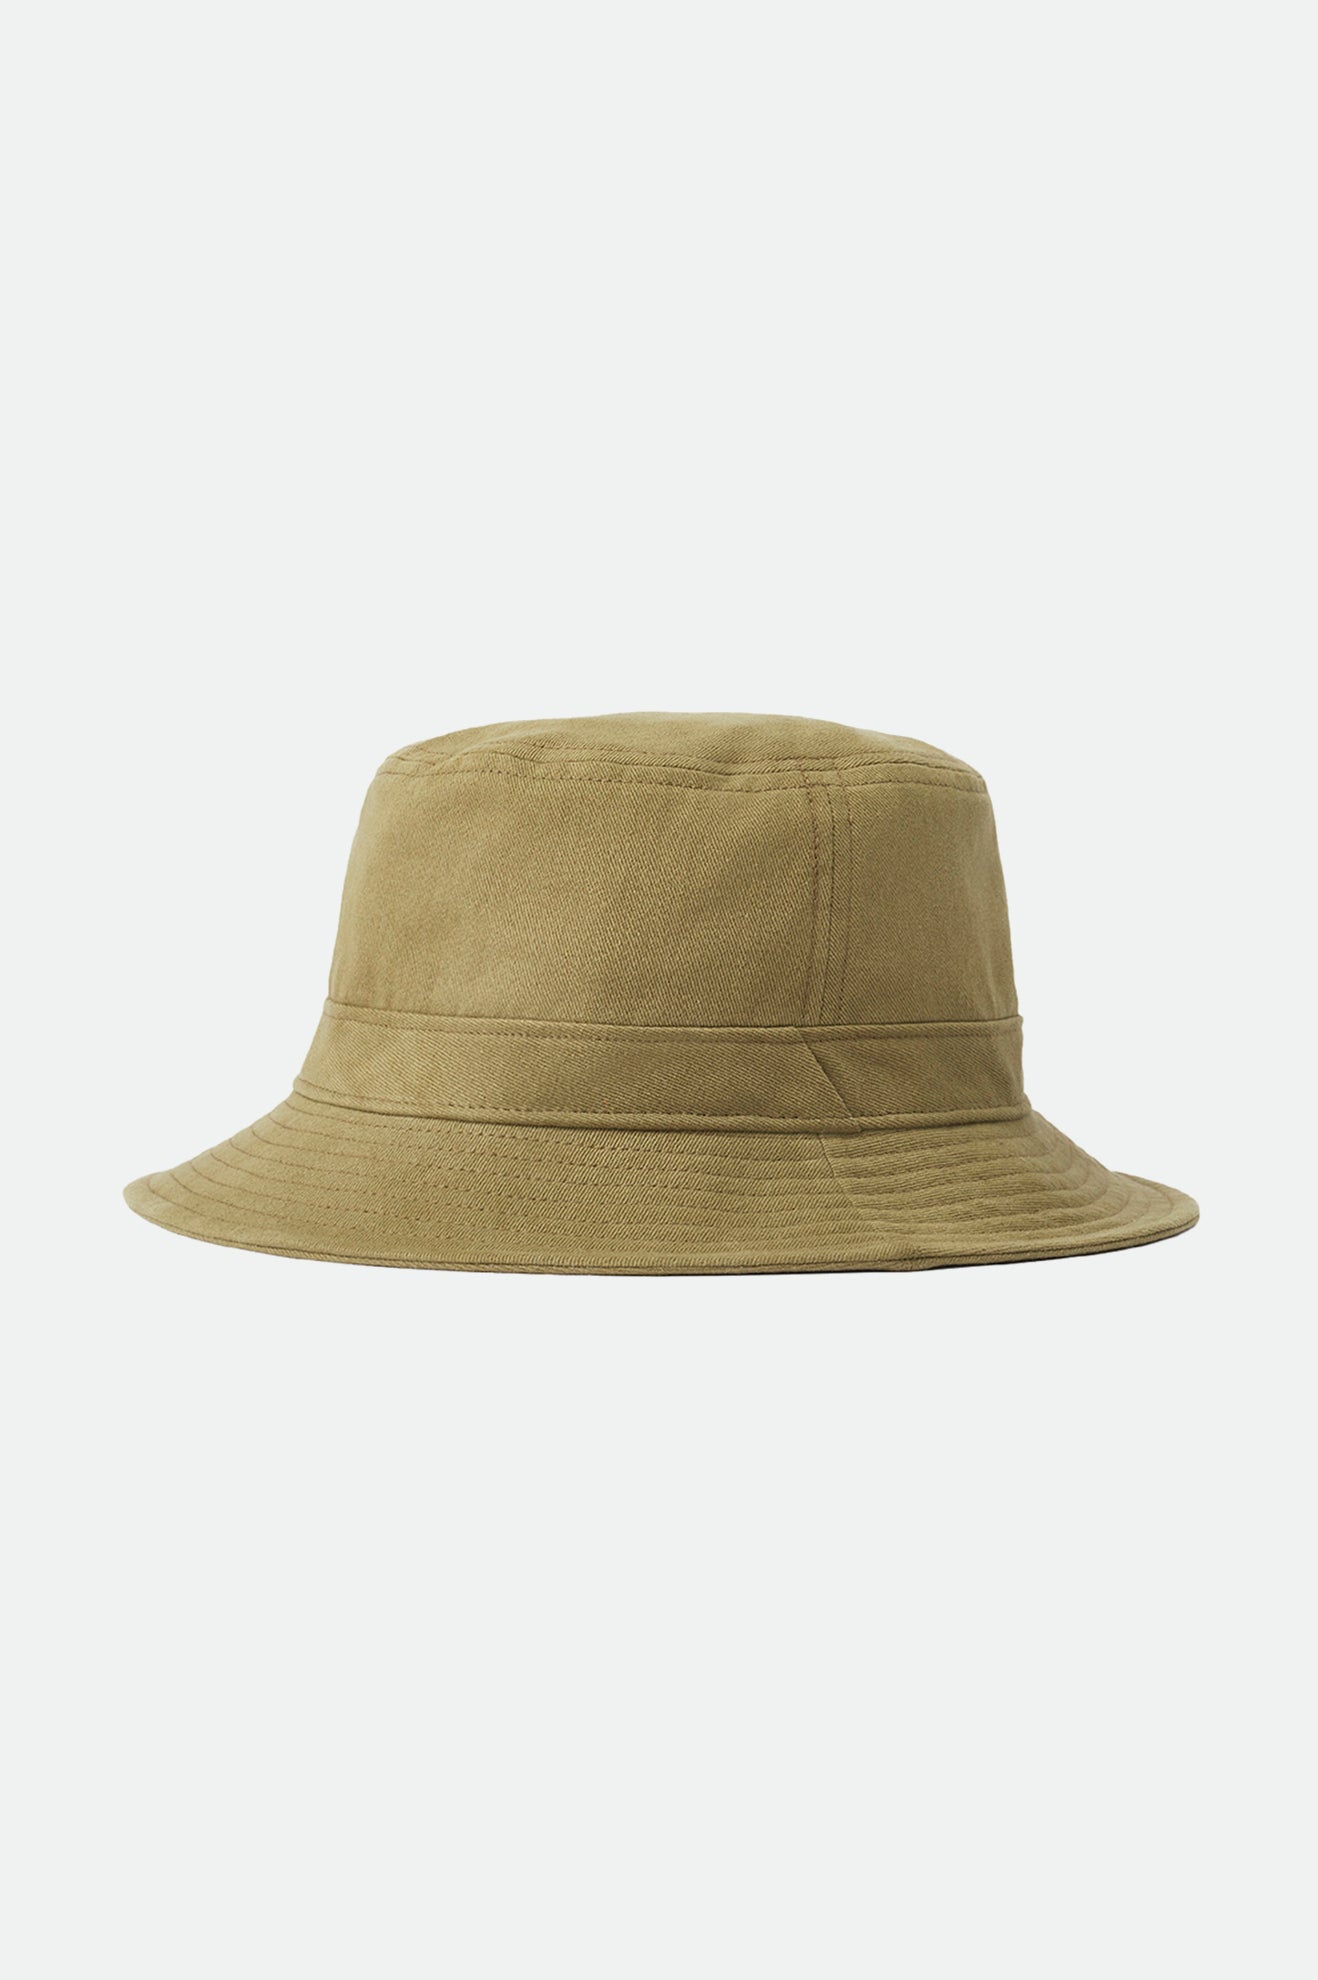 Beta Packable Bucket Hat - Military Olive